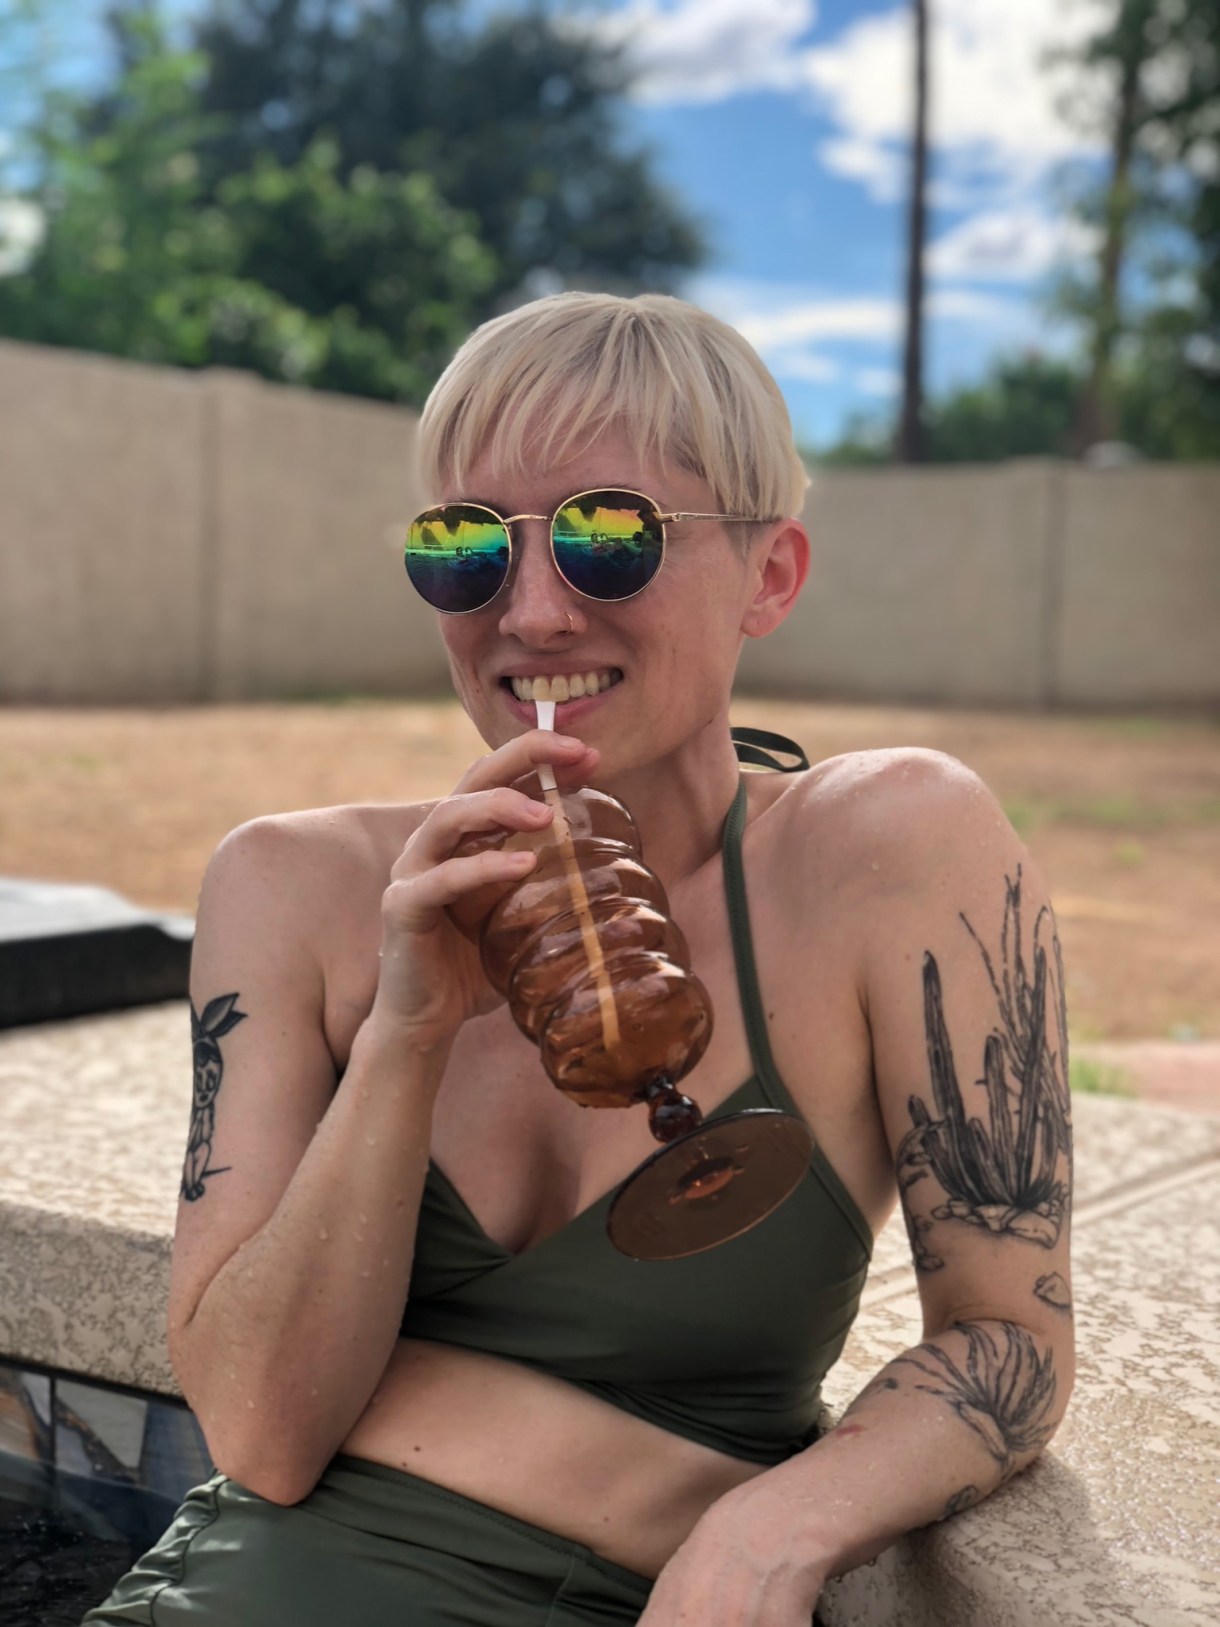 laneia, a white woman with blonde hair, wears mirrored sunglasses and smiles while siping a drink from a cup. she is wearing a grin bikini and leaning on the edge of a pool. you can see her tattoos